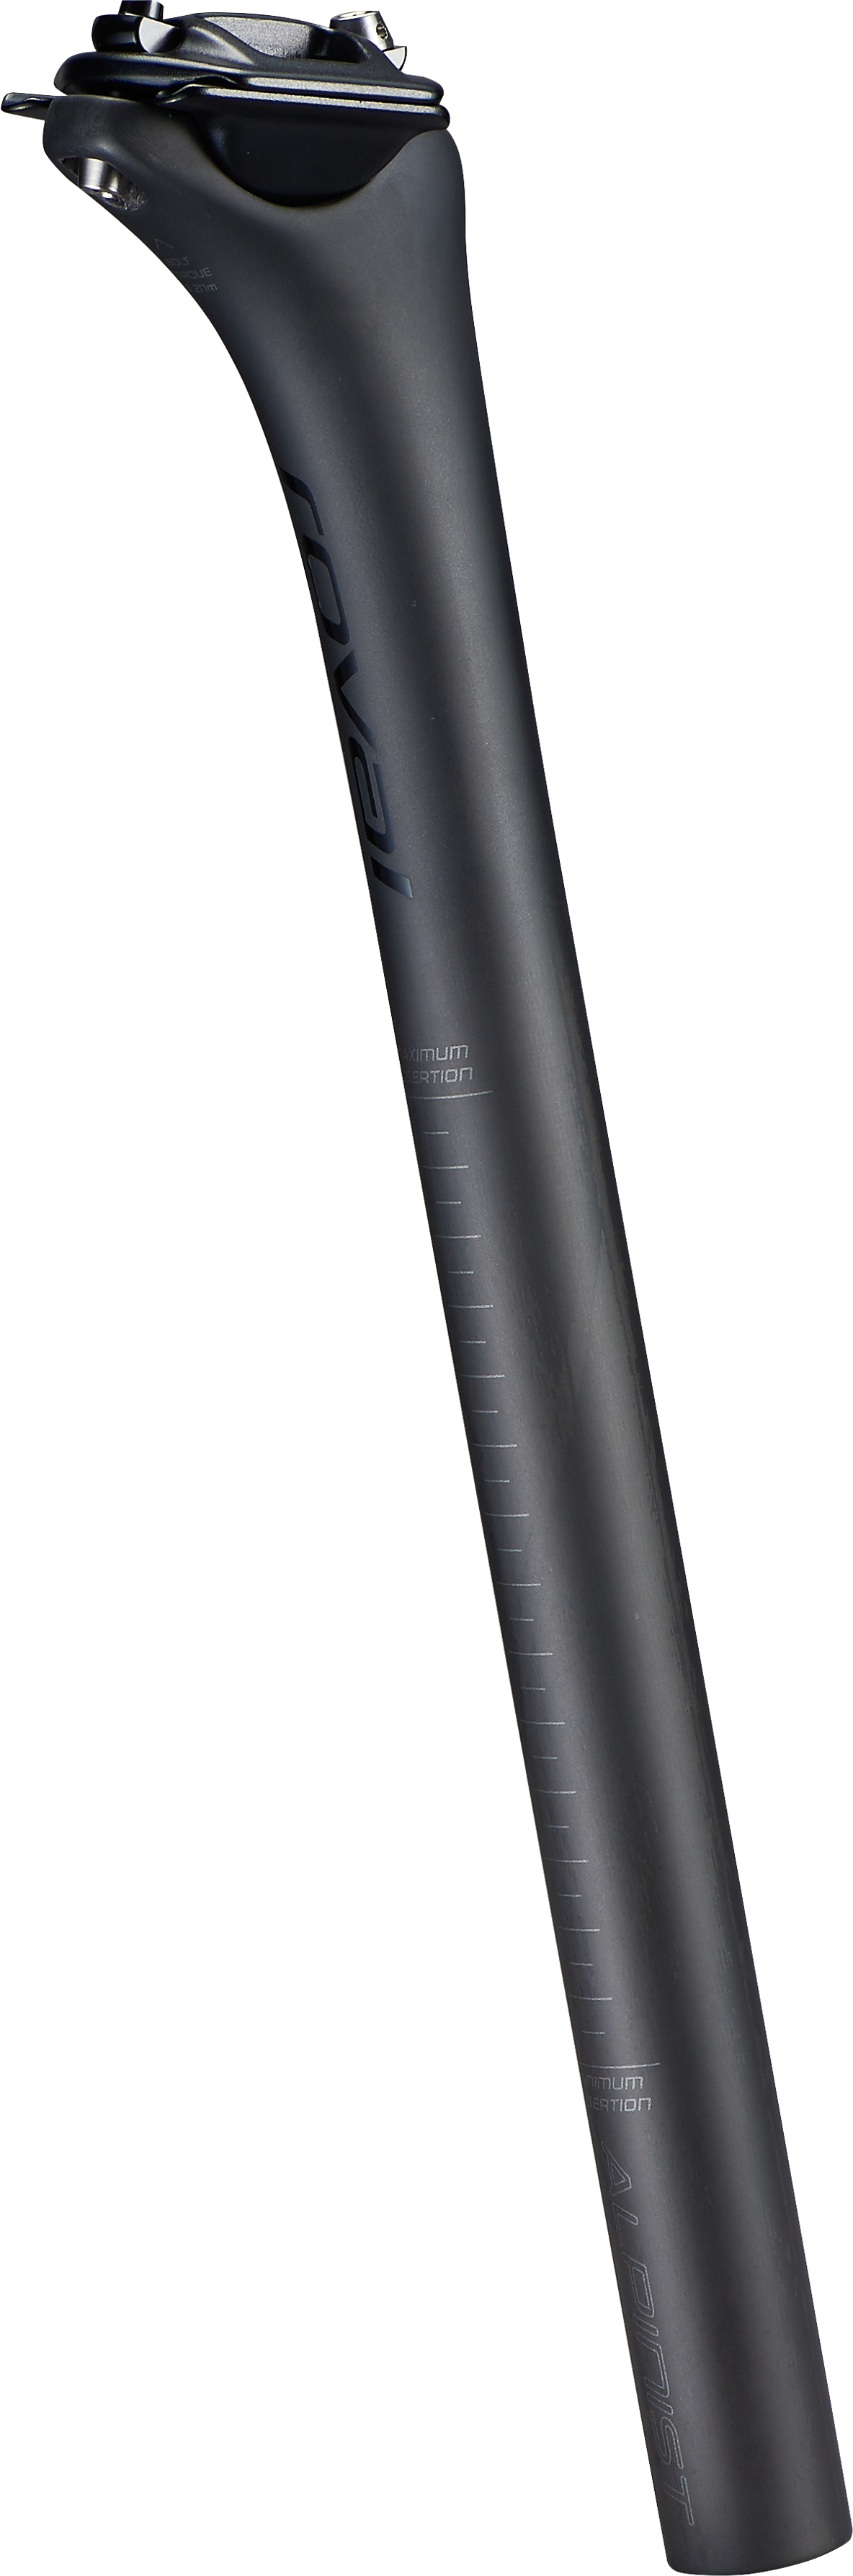 Specialized  Roval Alpinist Seatpost 27.2mm x 300mm Black